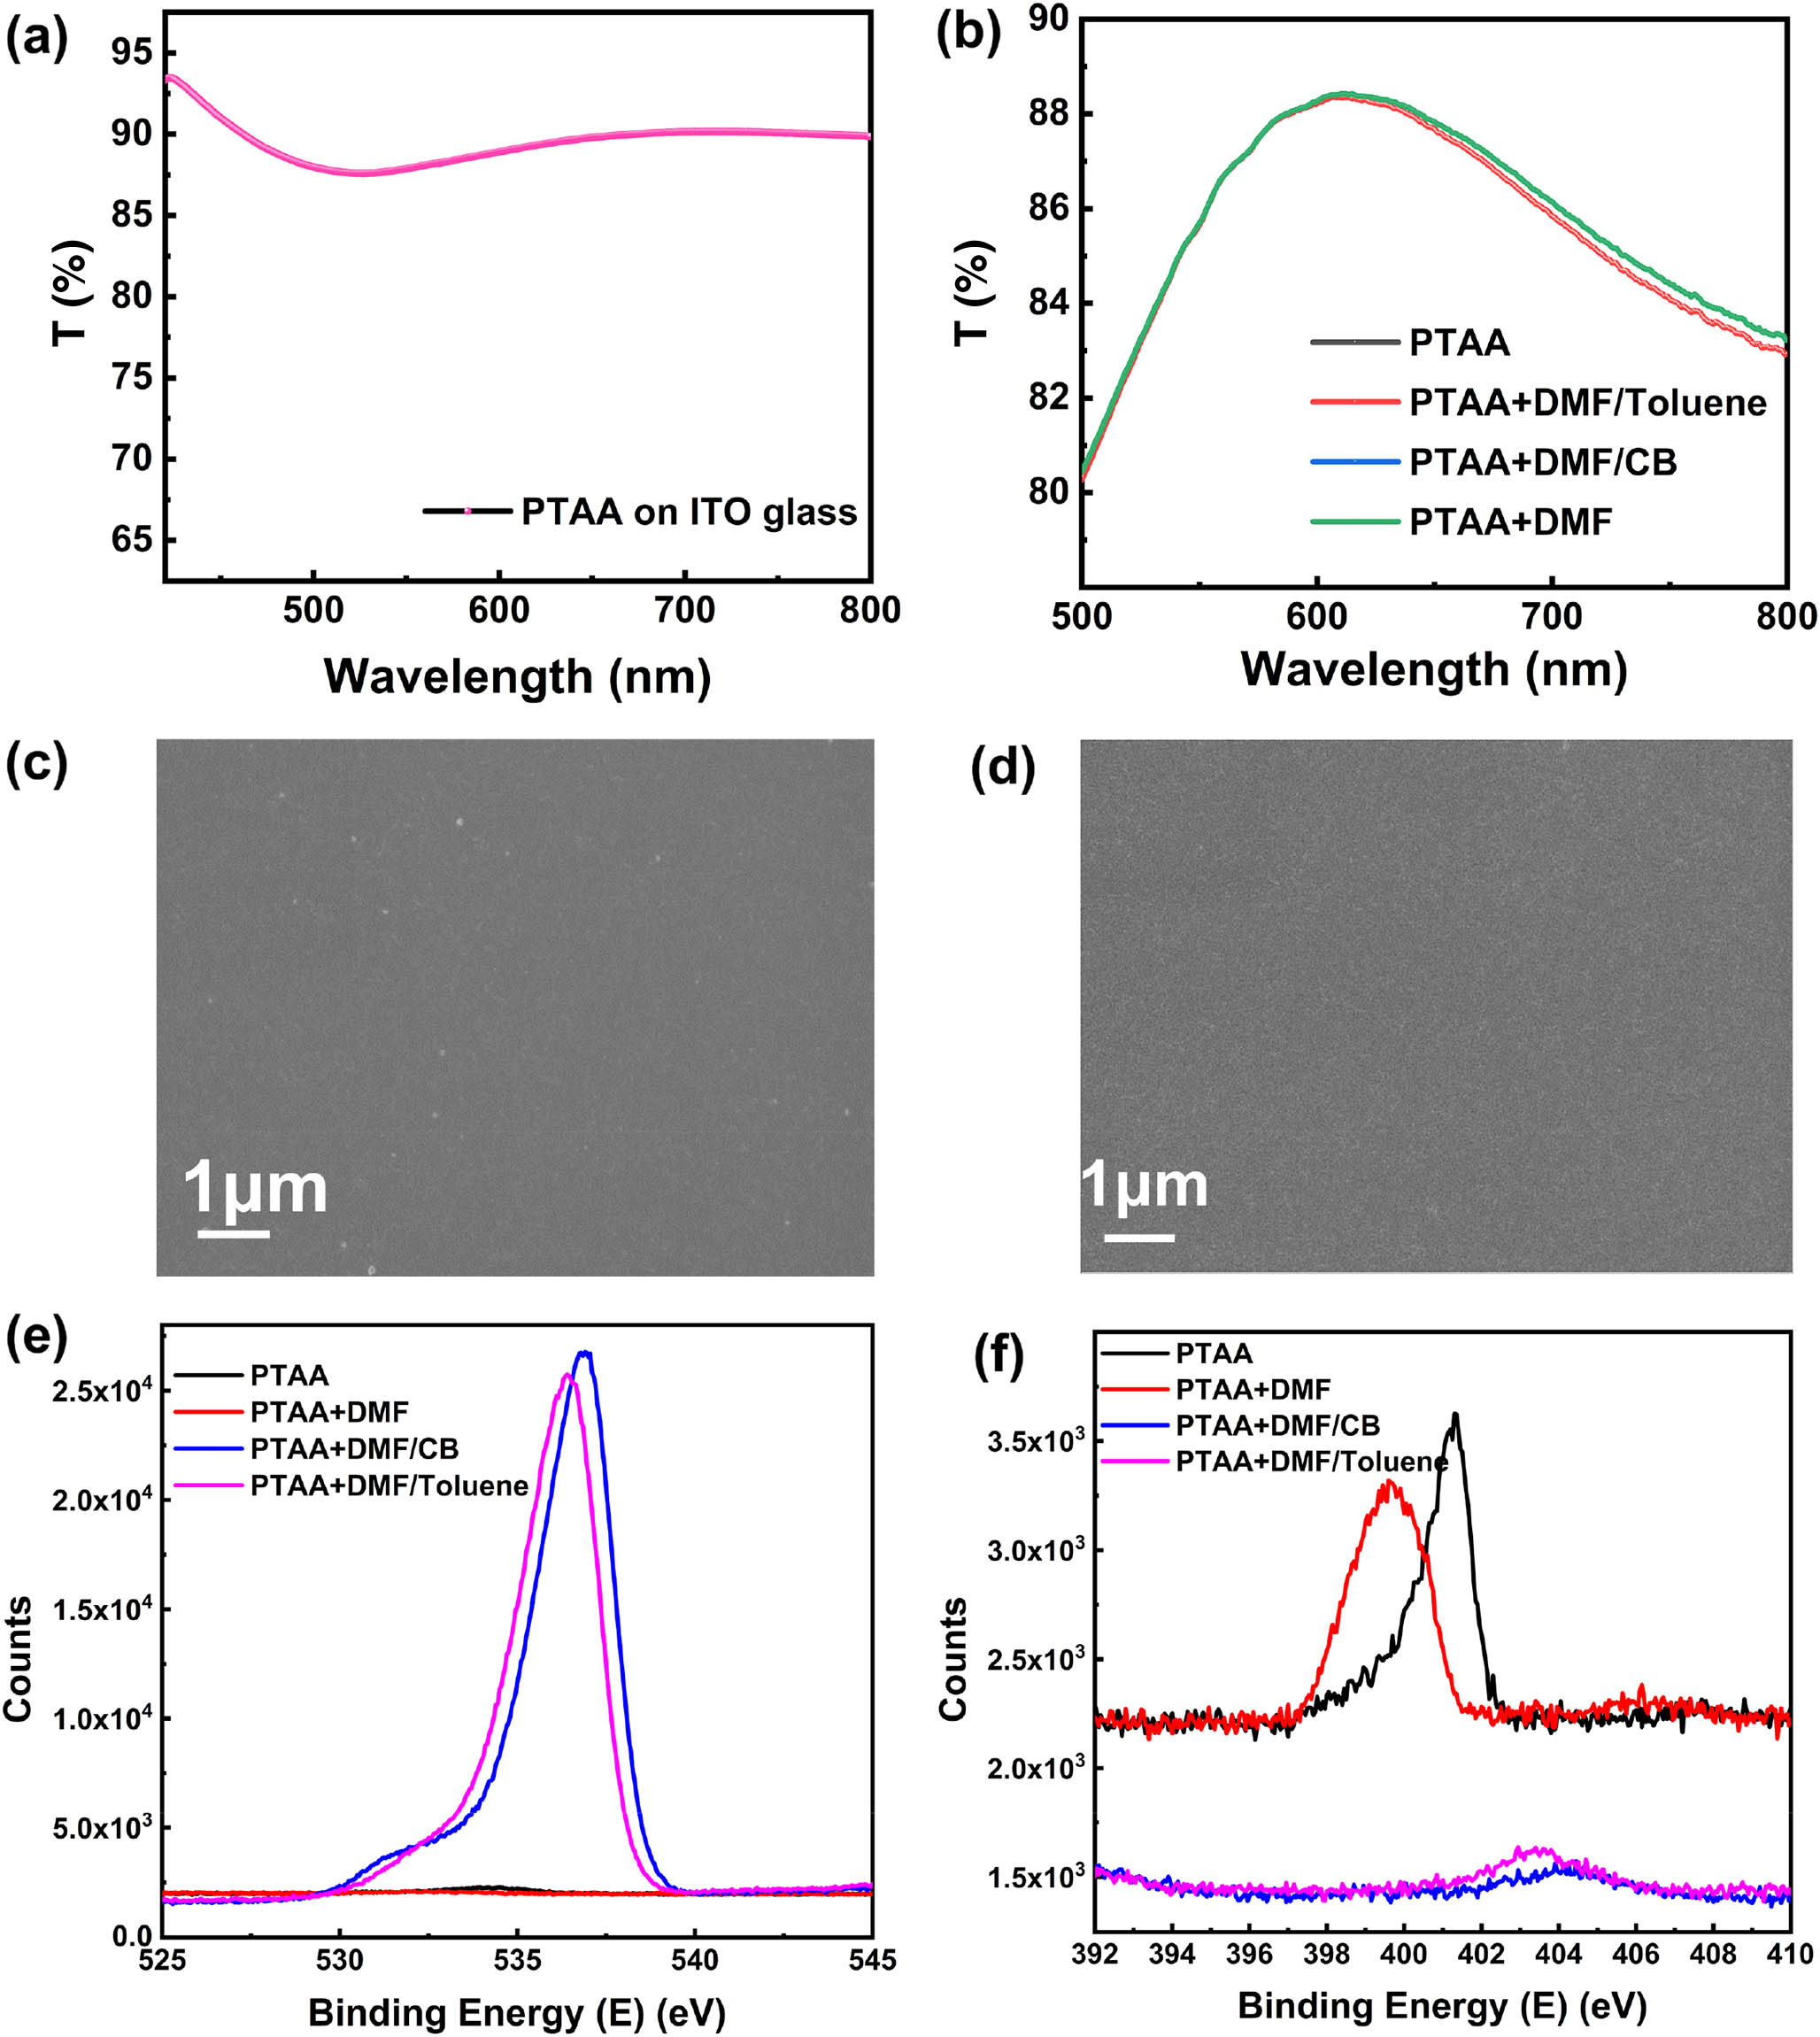 Transmittance of PTAA on (a) ITO glass and on (b) electronic grade pure glass; SEM (scale bar=1 μm) images of (c) ITO glass and (d) PTAA precursor covered ITO glass. XPS profiles for PTAA, PTAA+DMF, PTAA+DMF/CB, and PTAA+DMF/toluene on ITO substrate: (e) scan for O 1s; (f) scan for N 1s.